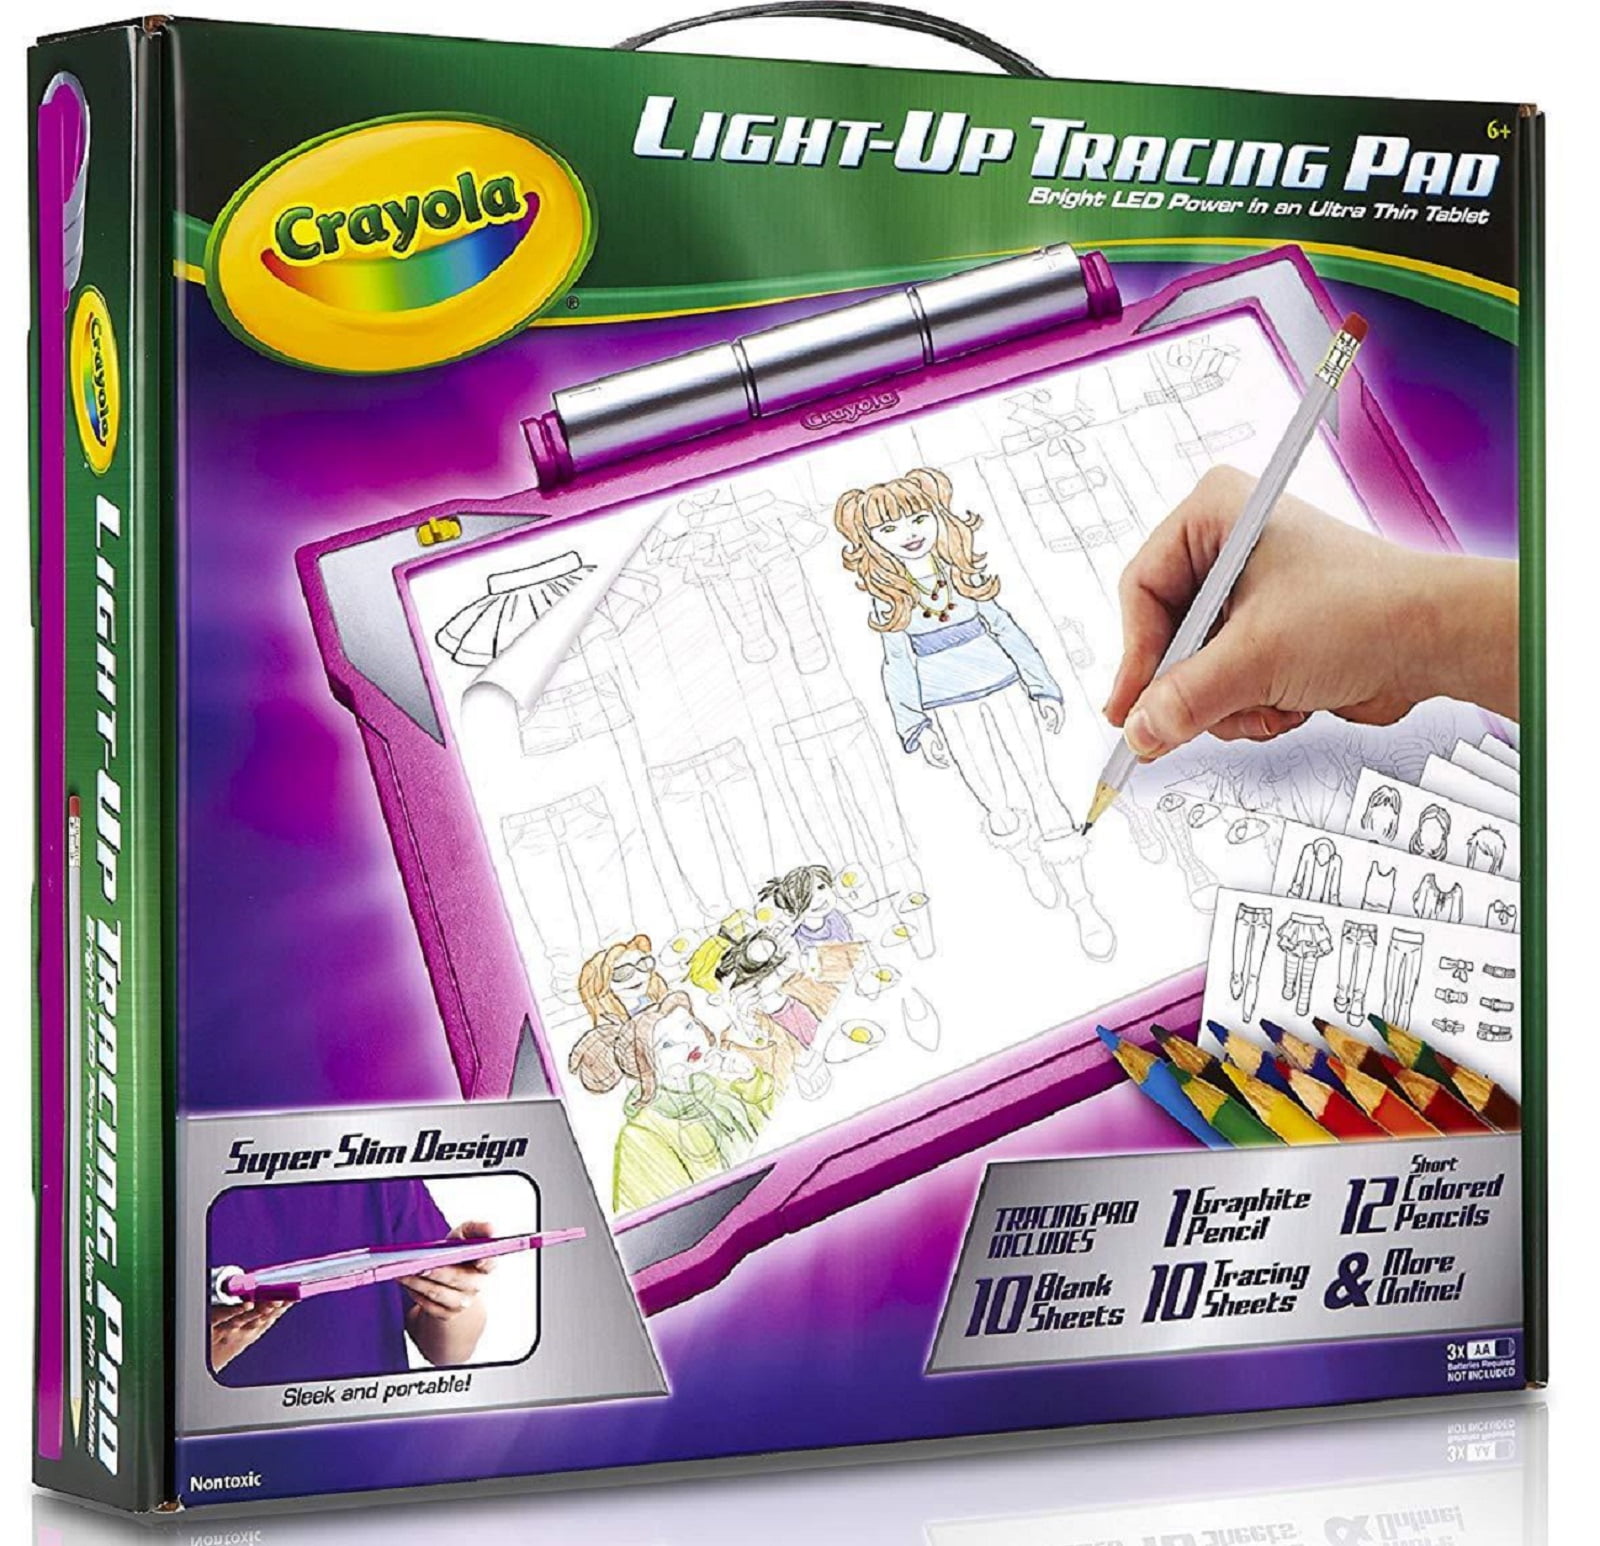 Crayola Light-Up Tracing Pad Pink Ages 